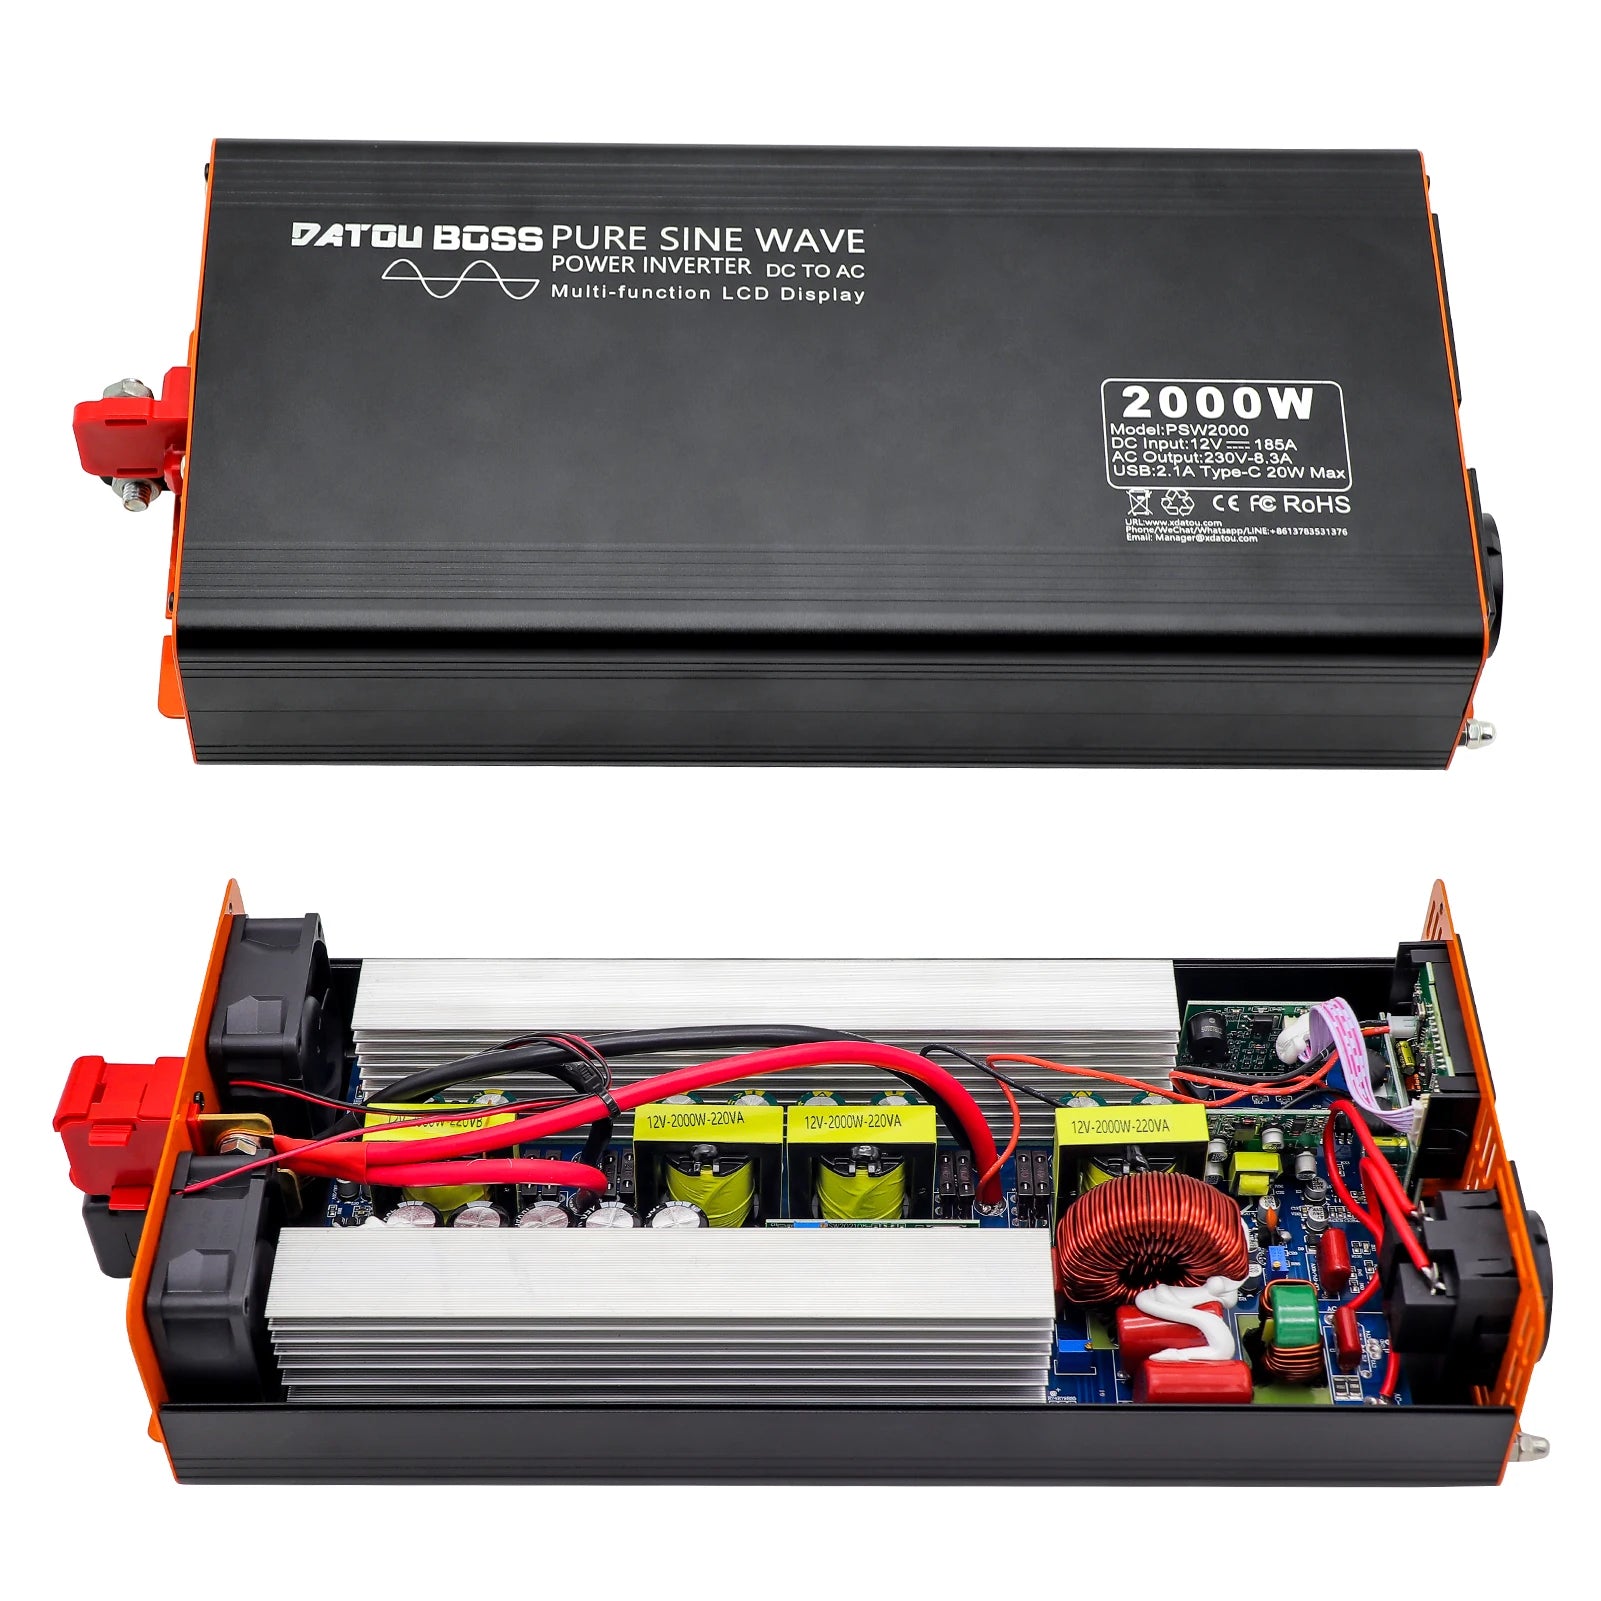 DATOUBOSS Pure Sine Wave Inverter, Pure Sine Wave Power Inverter converts DC power to AC at 220V/240V with LCD display.